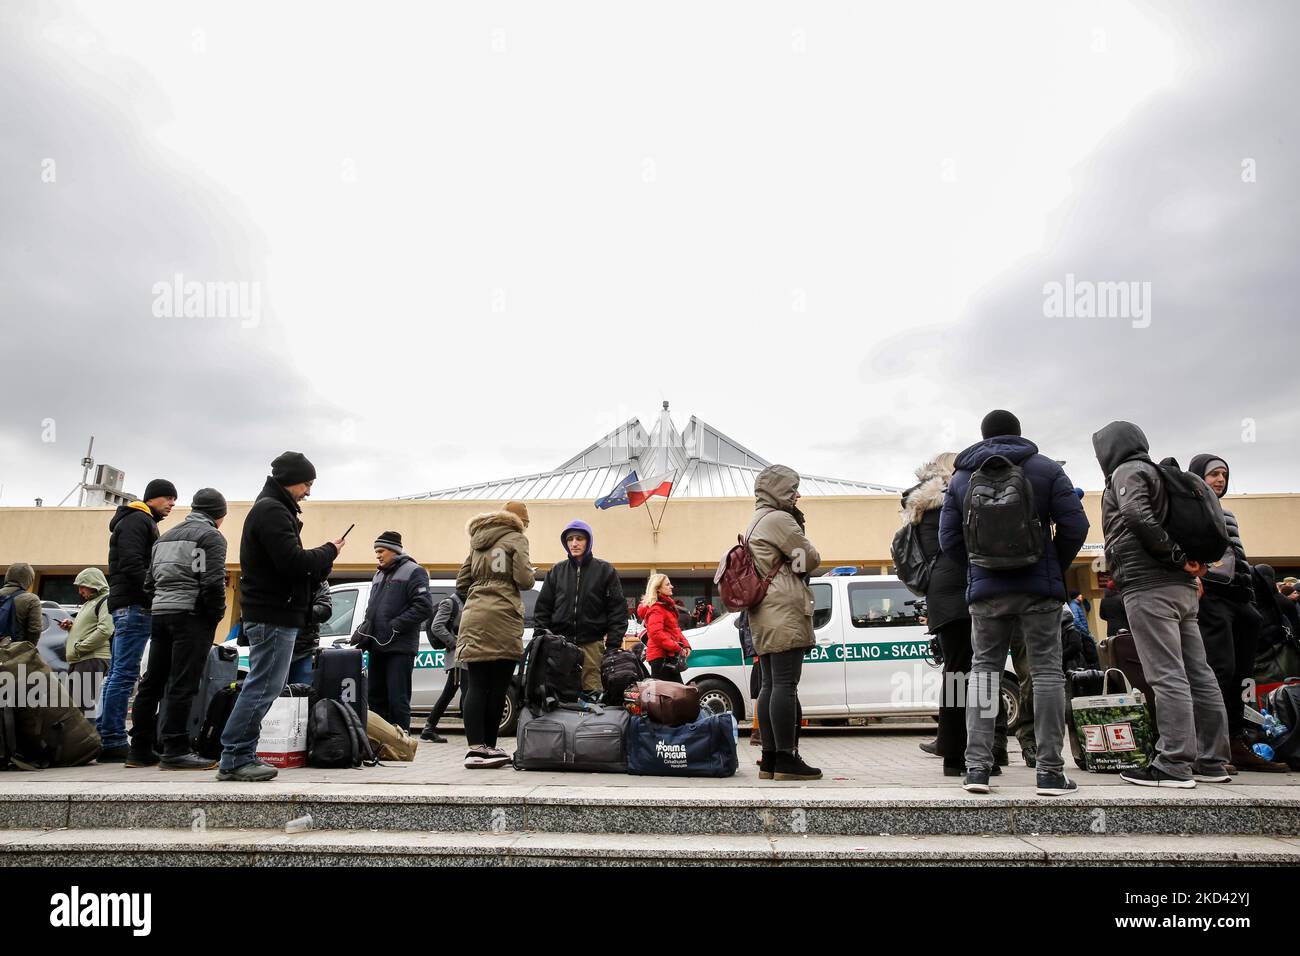 Ukrainians arrive at the railway station in Przemysl, Poland as more than 300 thousand people already fled Ukraine for Poland as a result of Russian invasion - March 2, 2022. As the Russian Federation army crossed Ukrainian borders the conflict between Ukraine and Russian is expected to force up to 4 million Ukrainians to flee. Many of the refugees will seek asylum in Poland. Most escapees arrived to border towns like Przemysl and are relocated to inner cities. (Photo by Dominika Zarzycka/NurPhoto) Stock Photo